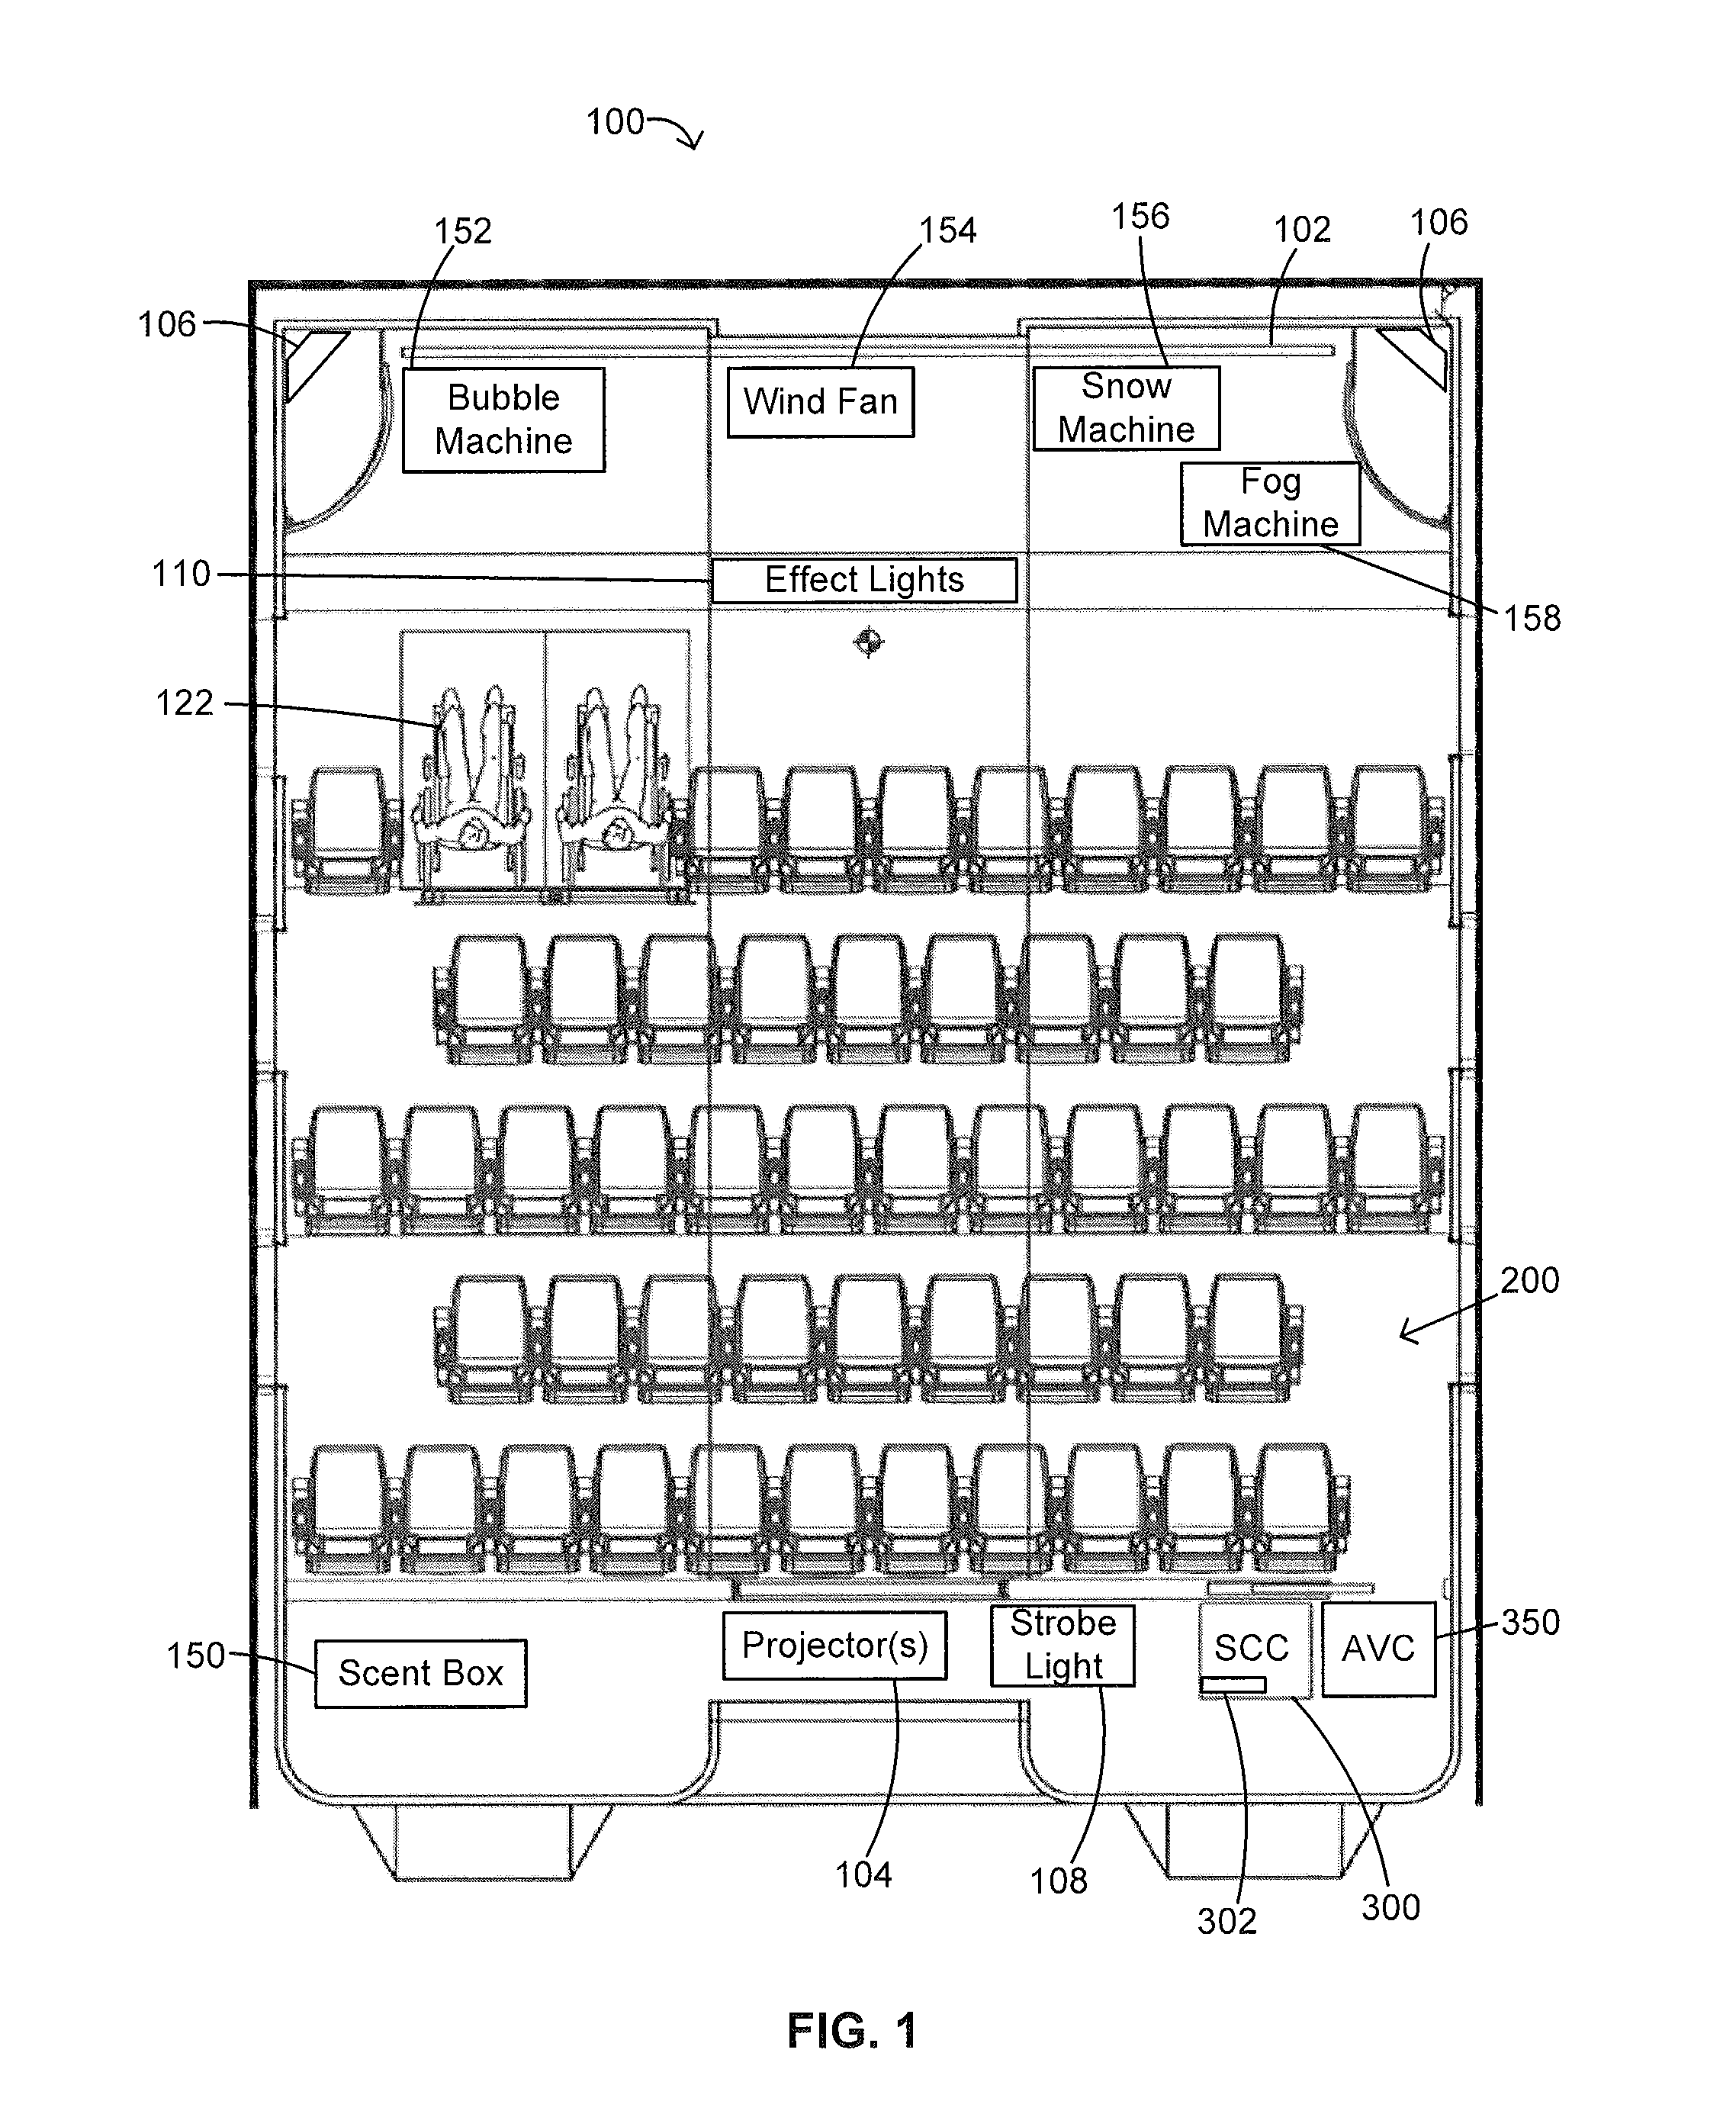 System, device and method for controlling effects in a theatre